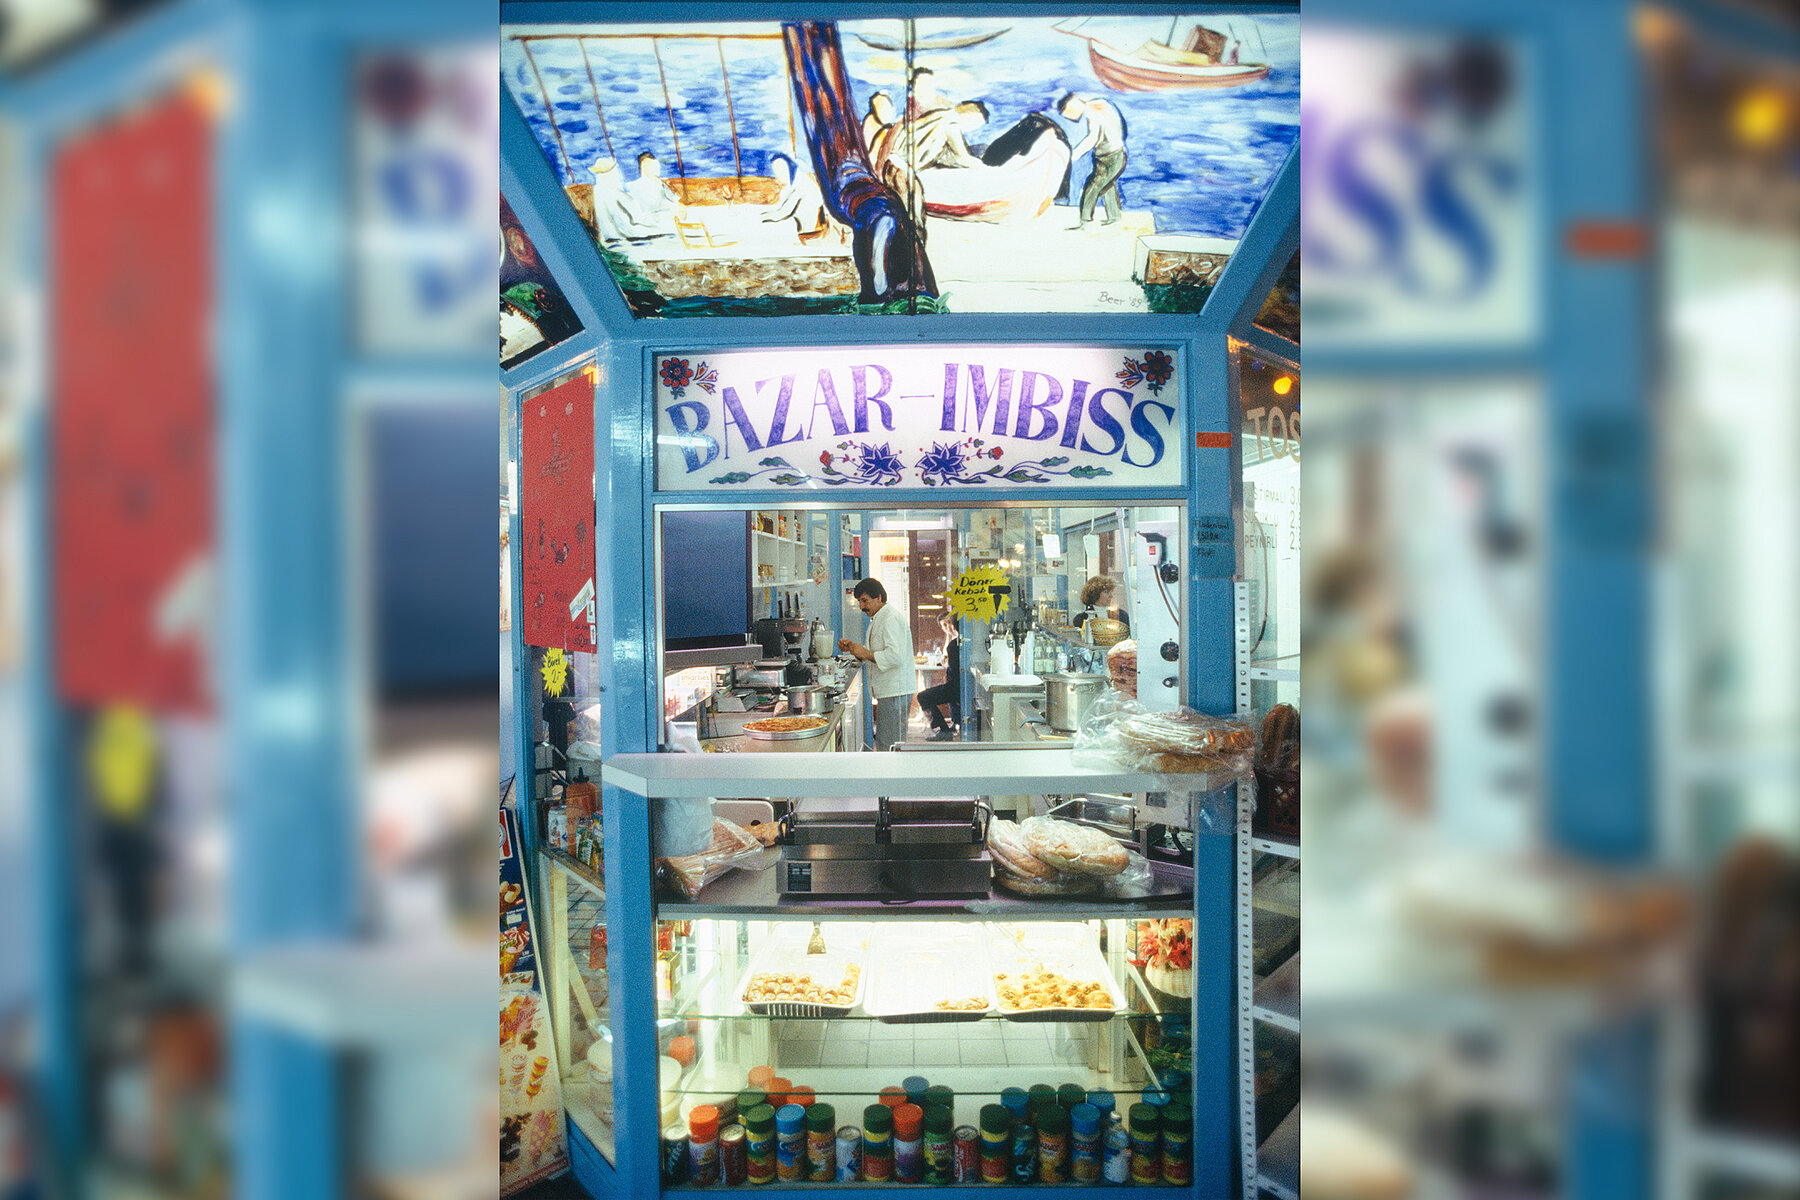 The counter of the Bazaar snack bar with pita bread and baklava in blue, above it a painting. Inside, people are working in the kitchen. 